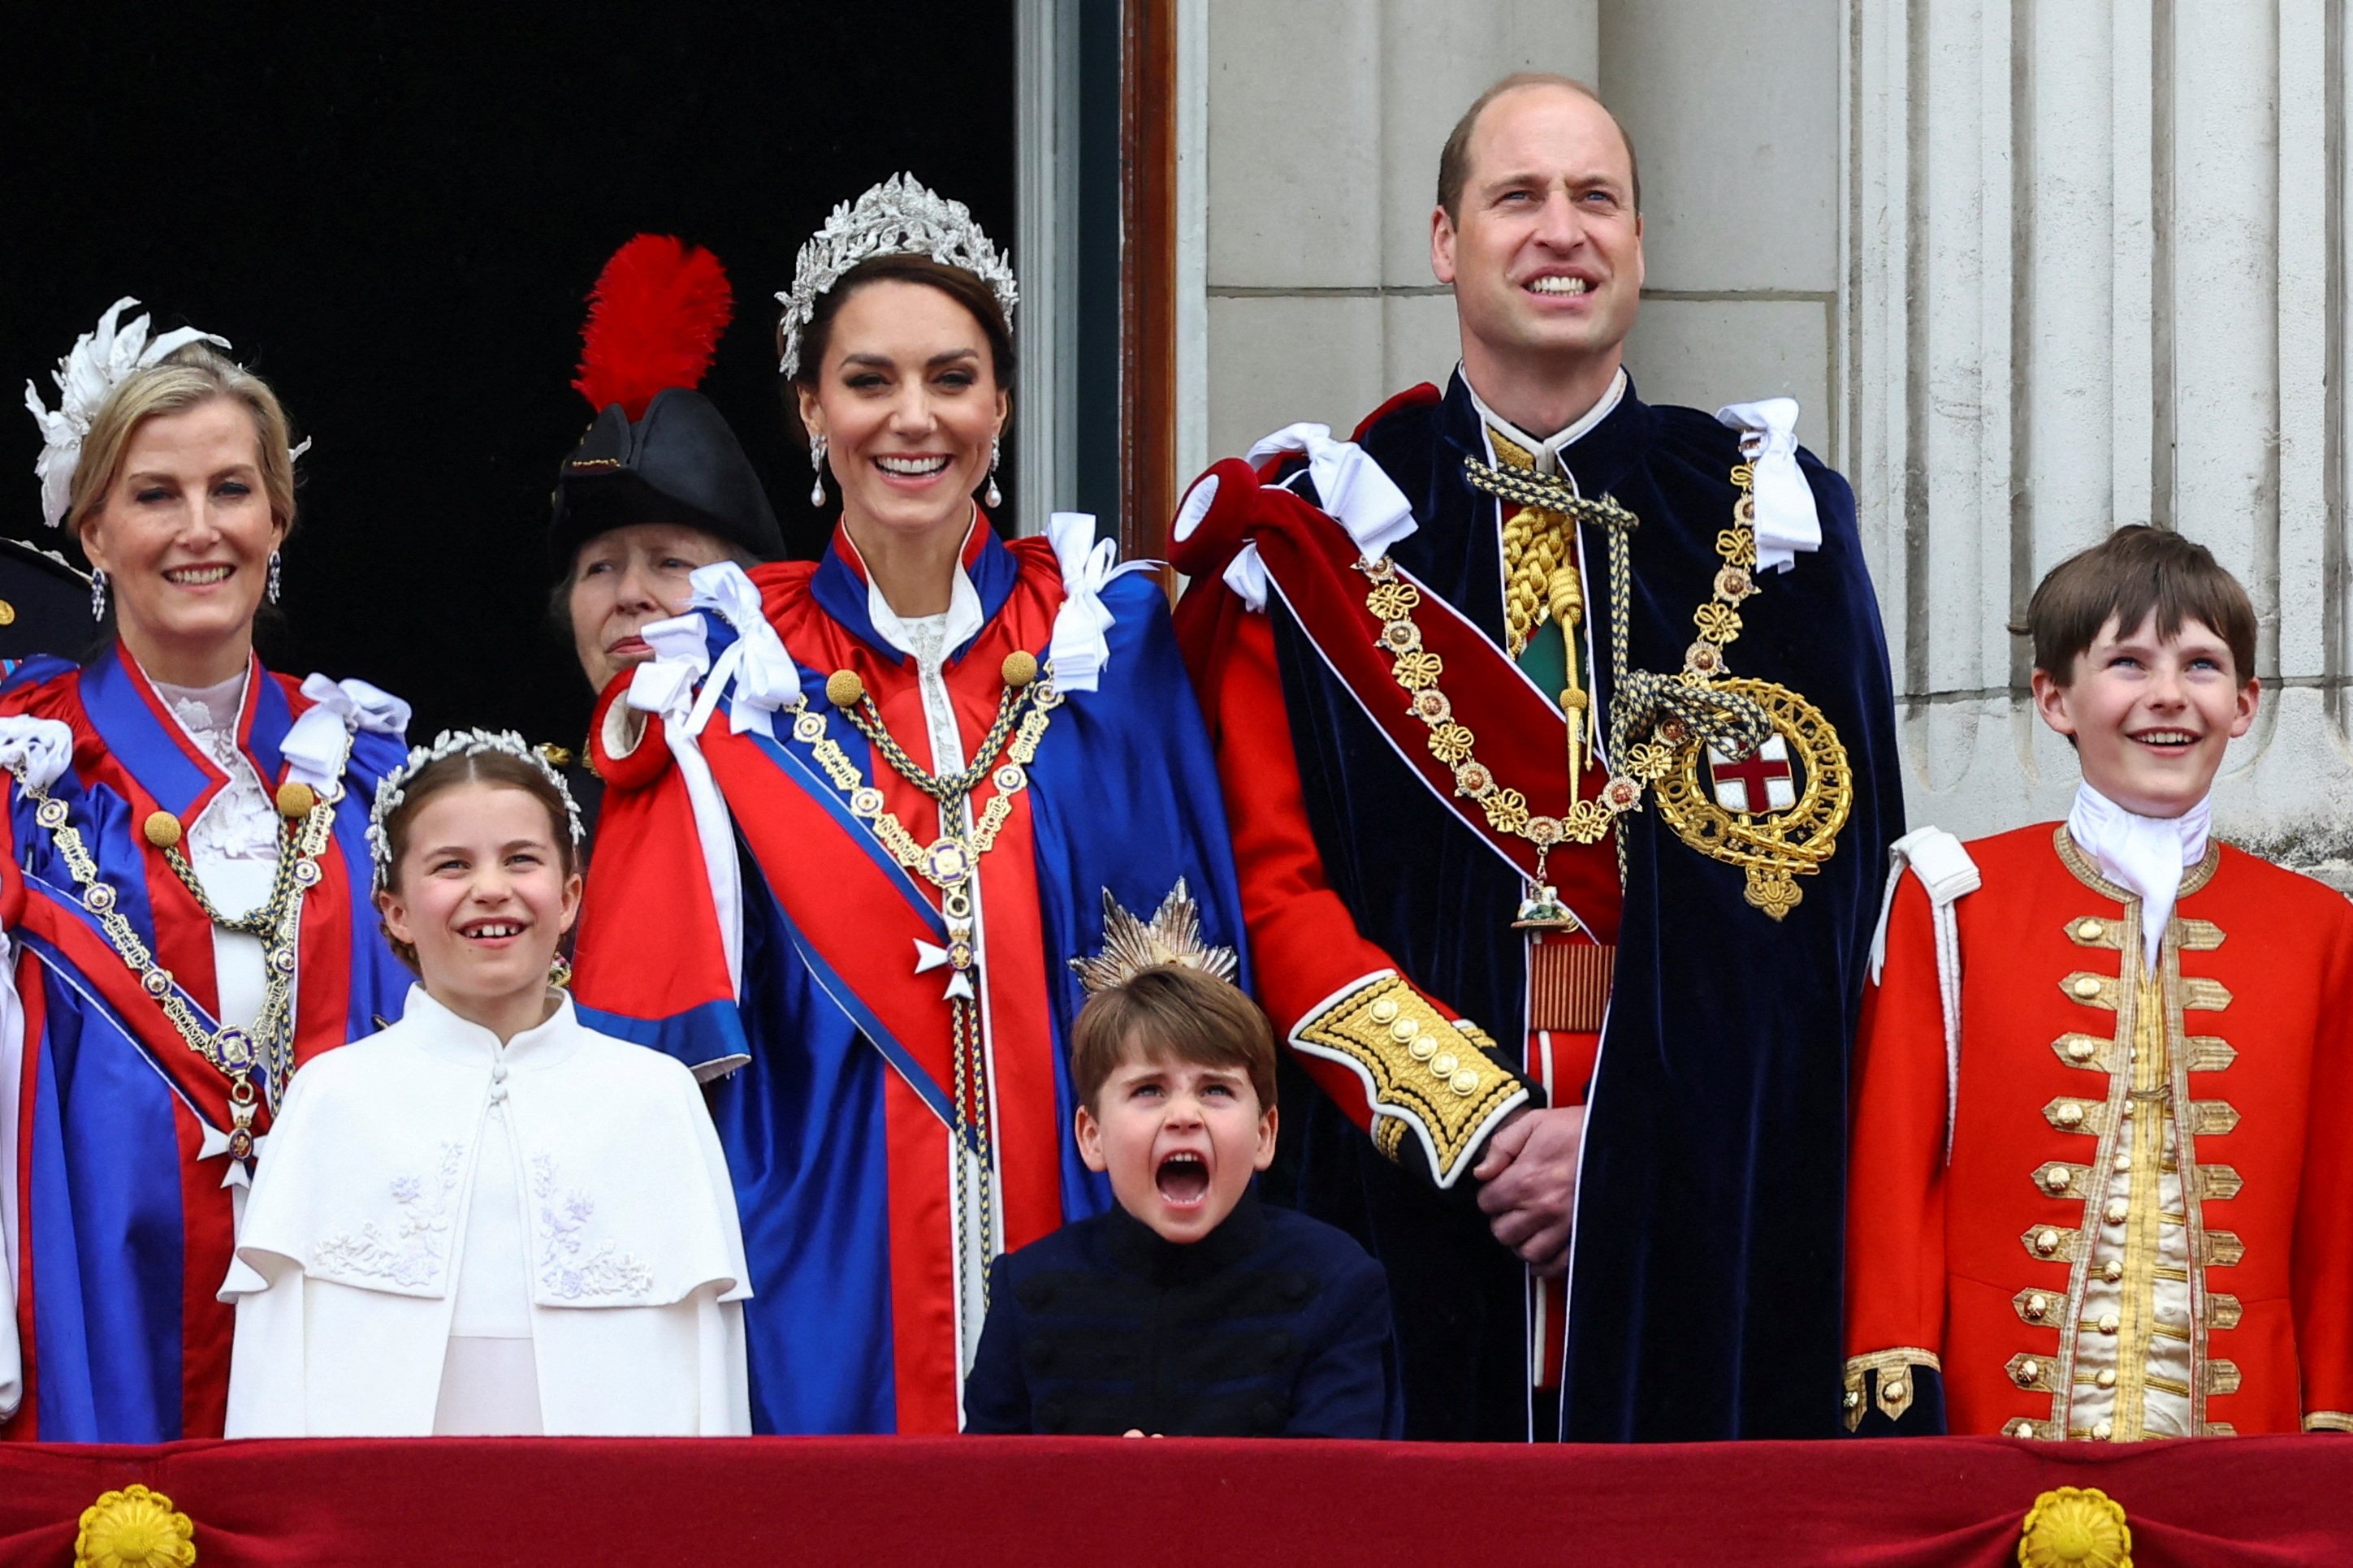 Charles III becomes UK king in 1st coronation since 1953 | Daily Sabah